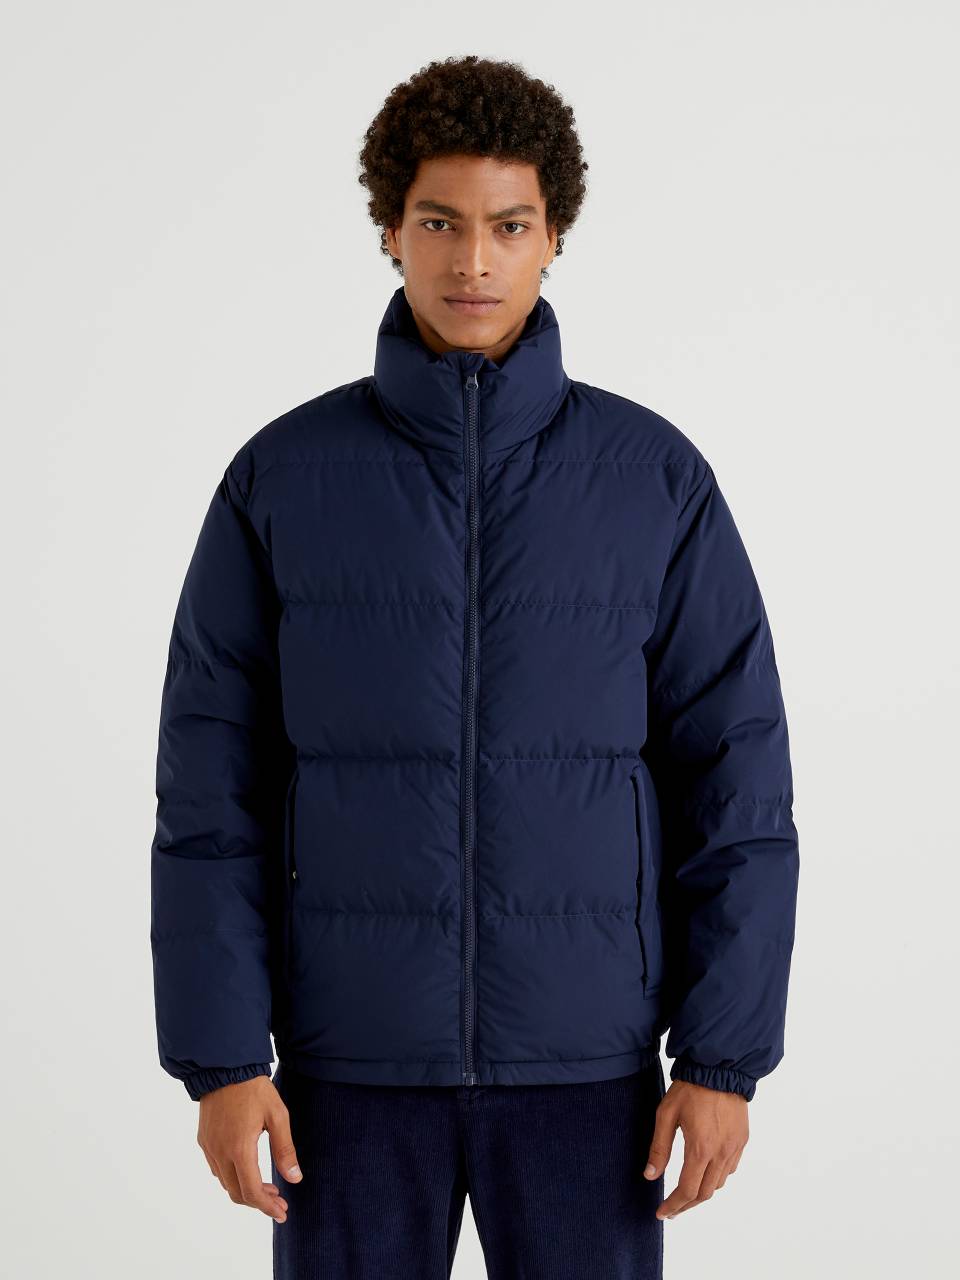 Benetton Short puffer jacket padded with recycled feathers - 2JF8UN01I_016